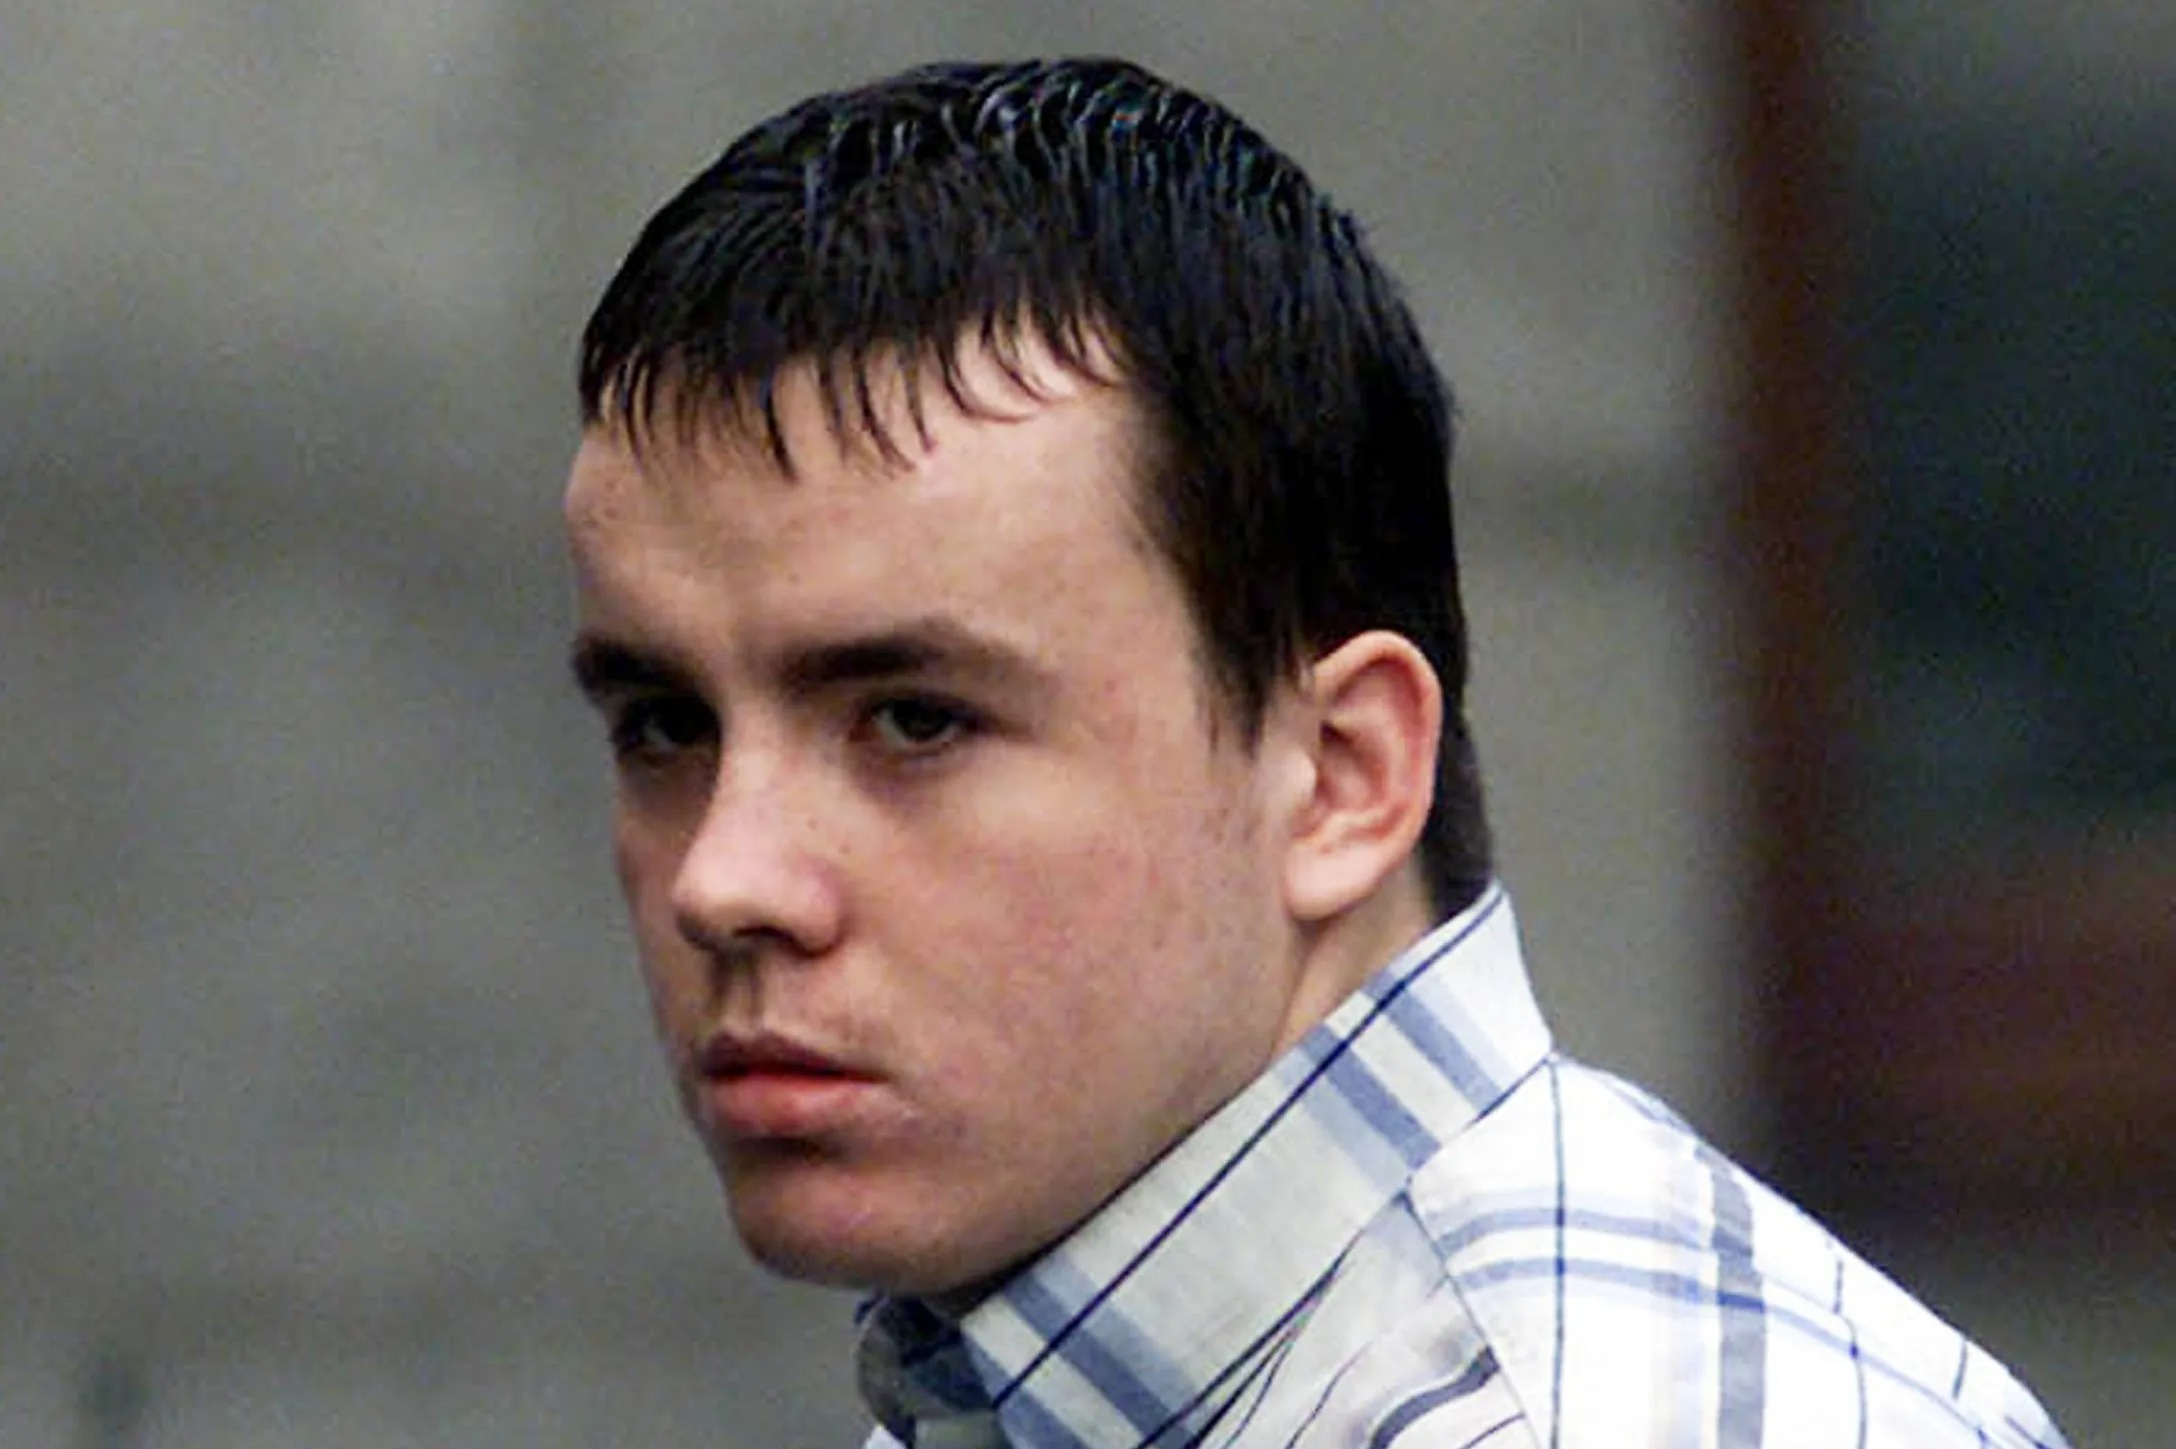 Gangland killer Dessie Dundon vows to wed girlfriend when freed from prison